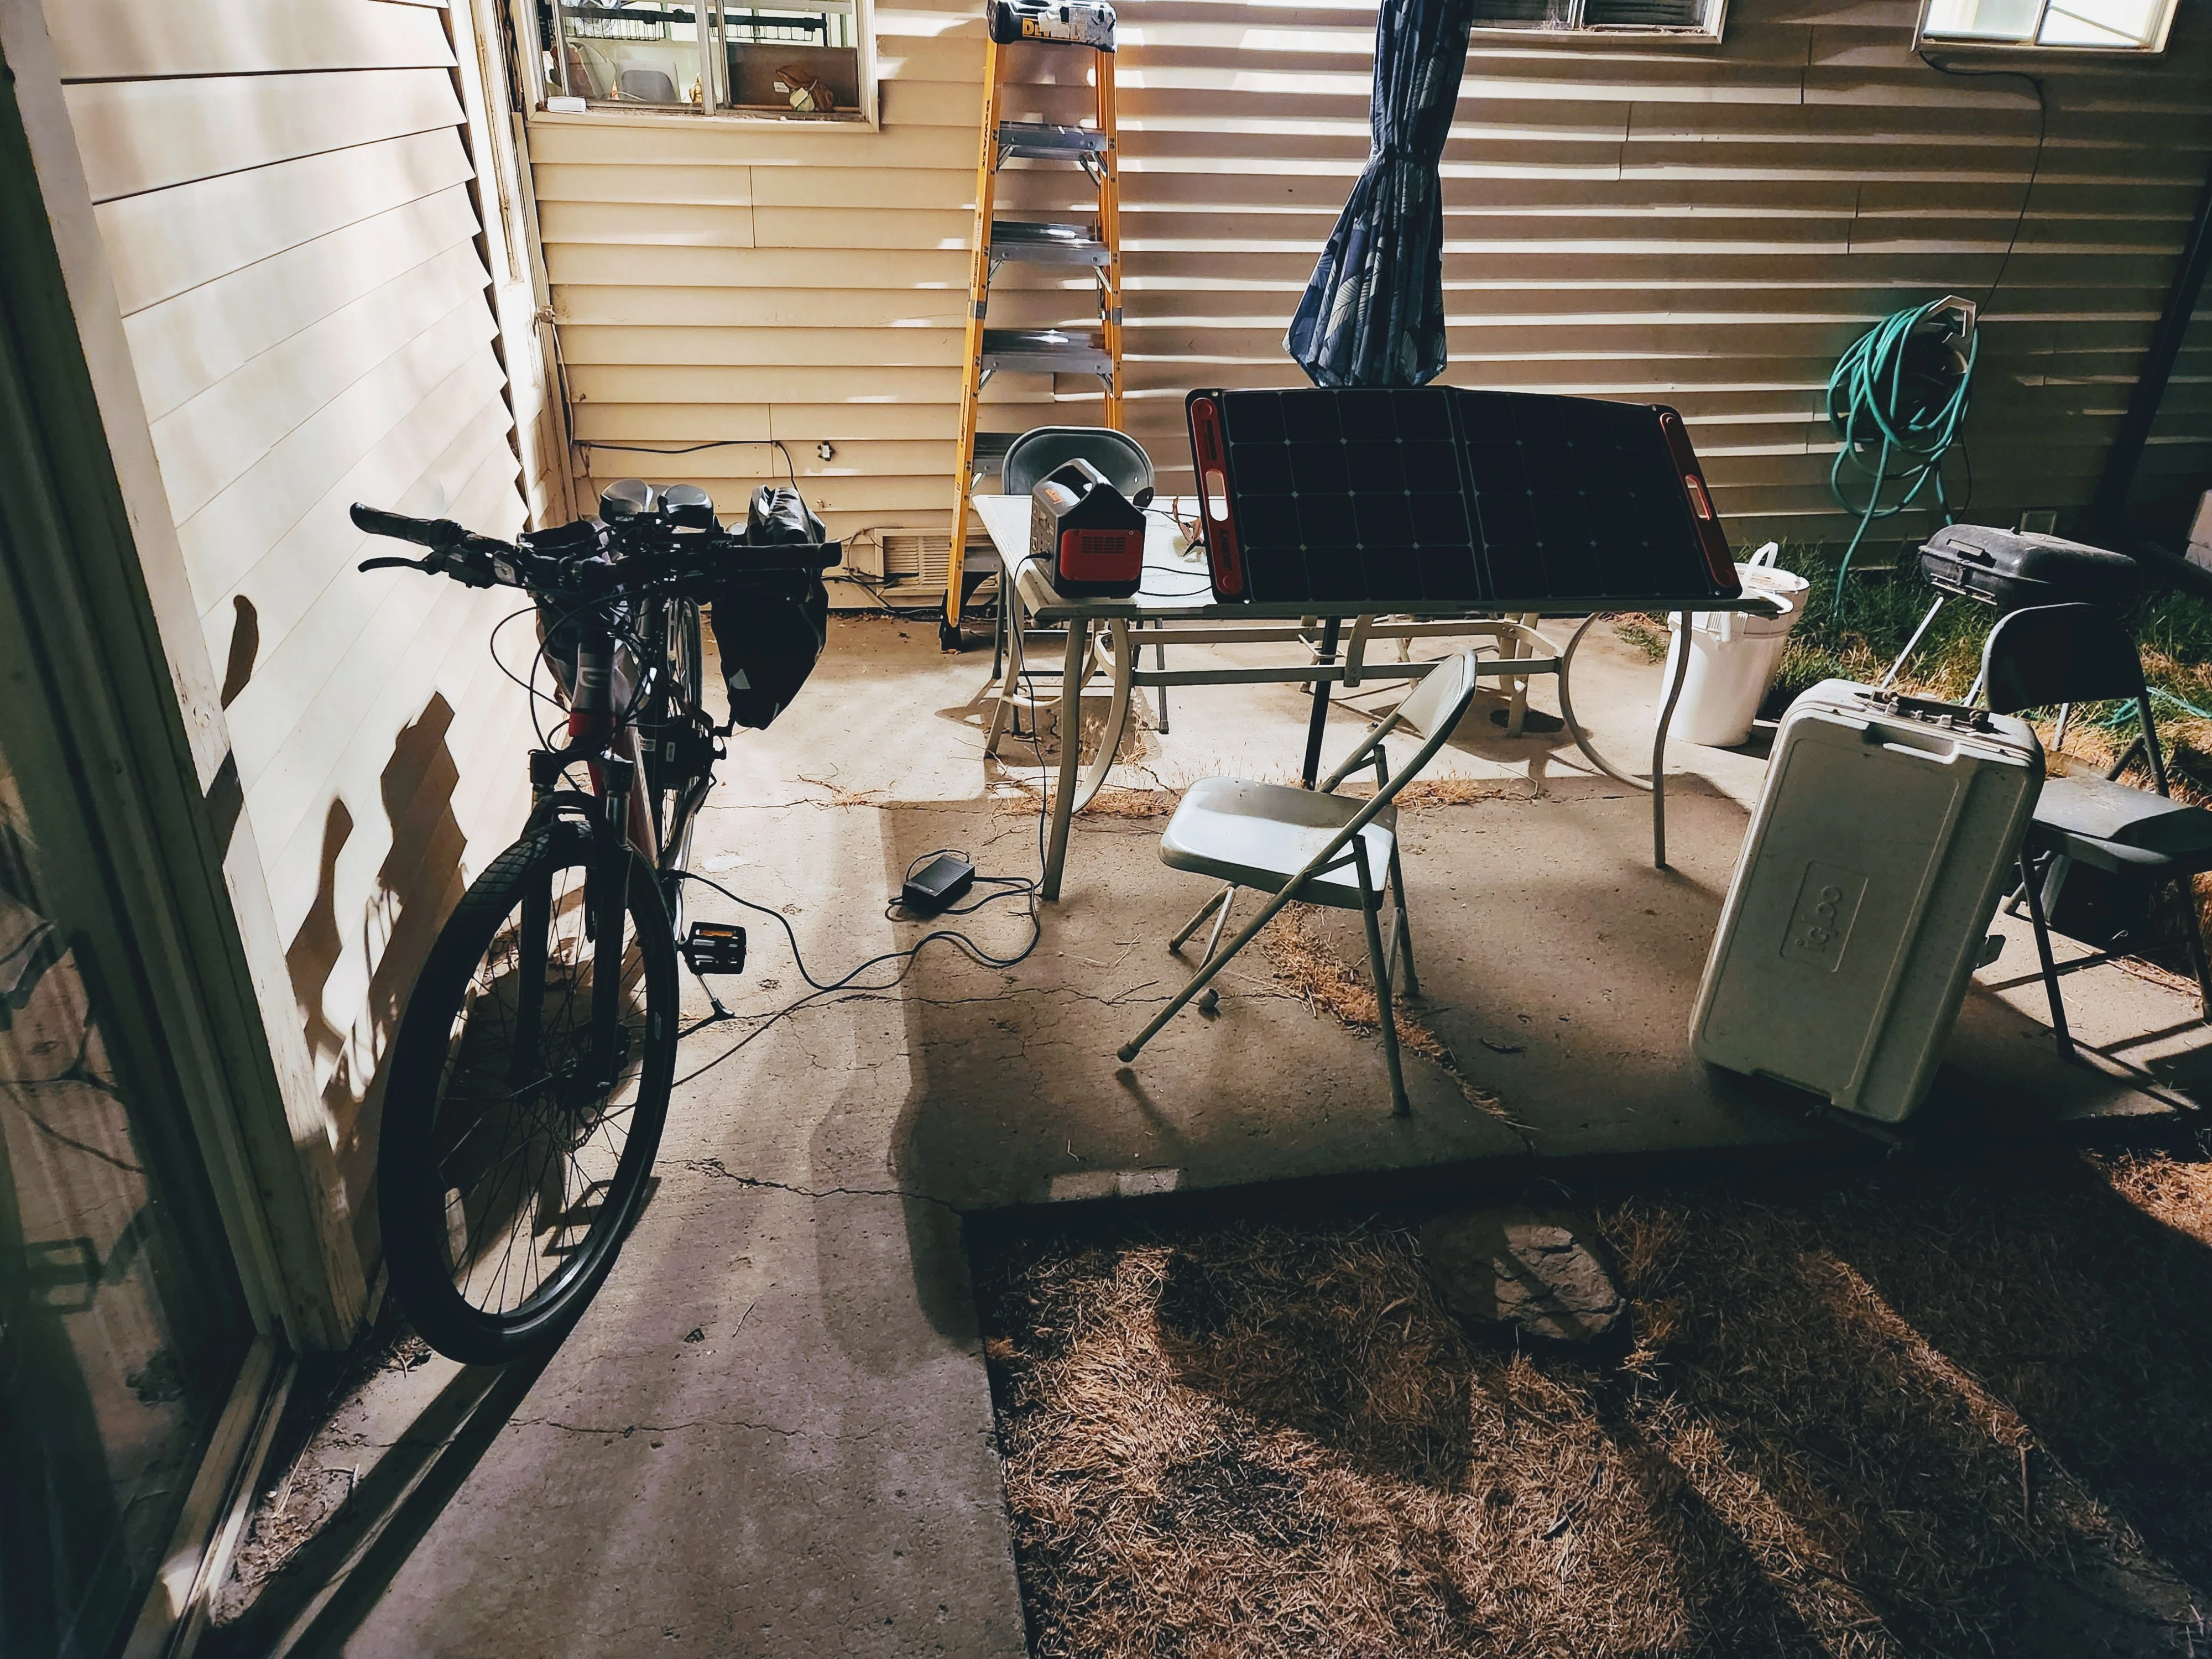 solar panel connected to Jackery generator charging an ebike.